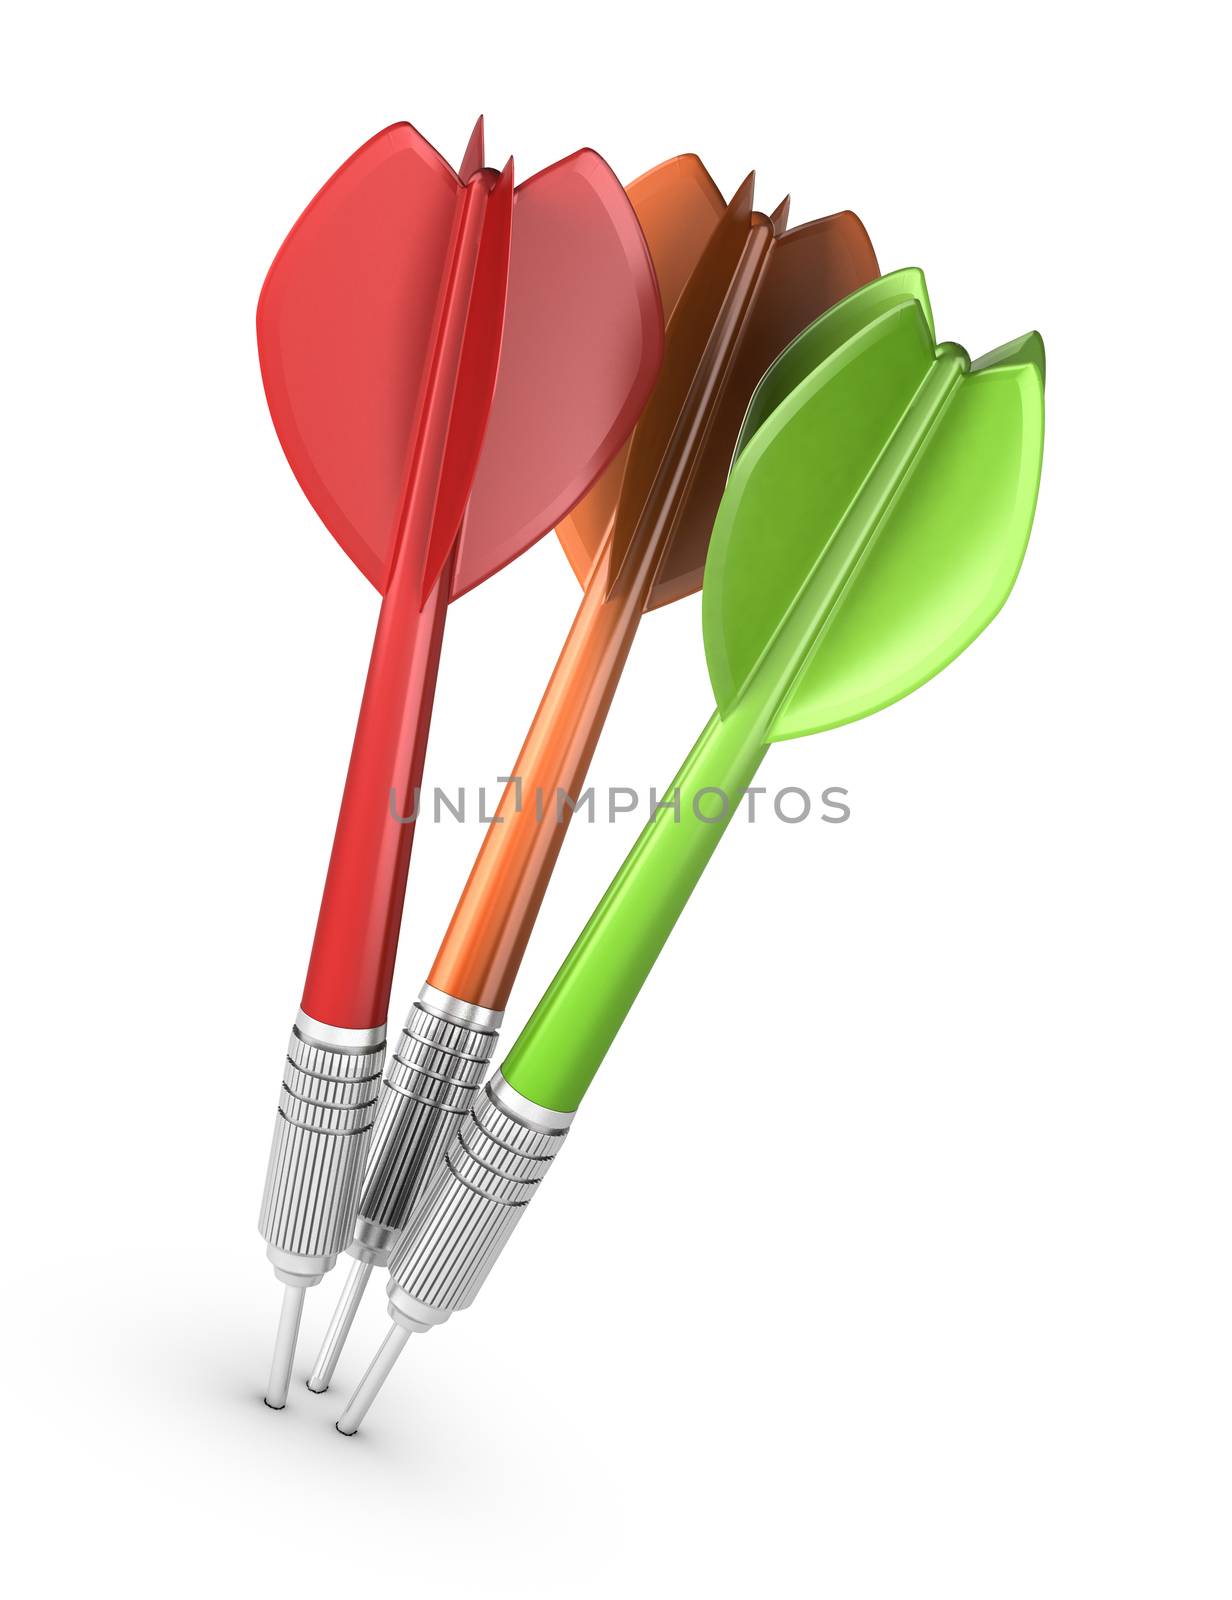 Three darts hitting the center of a dartboard over white background, modern design for illustration purpose. Concept of marketing strategy or business communication. 